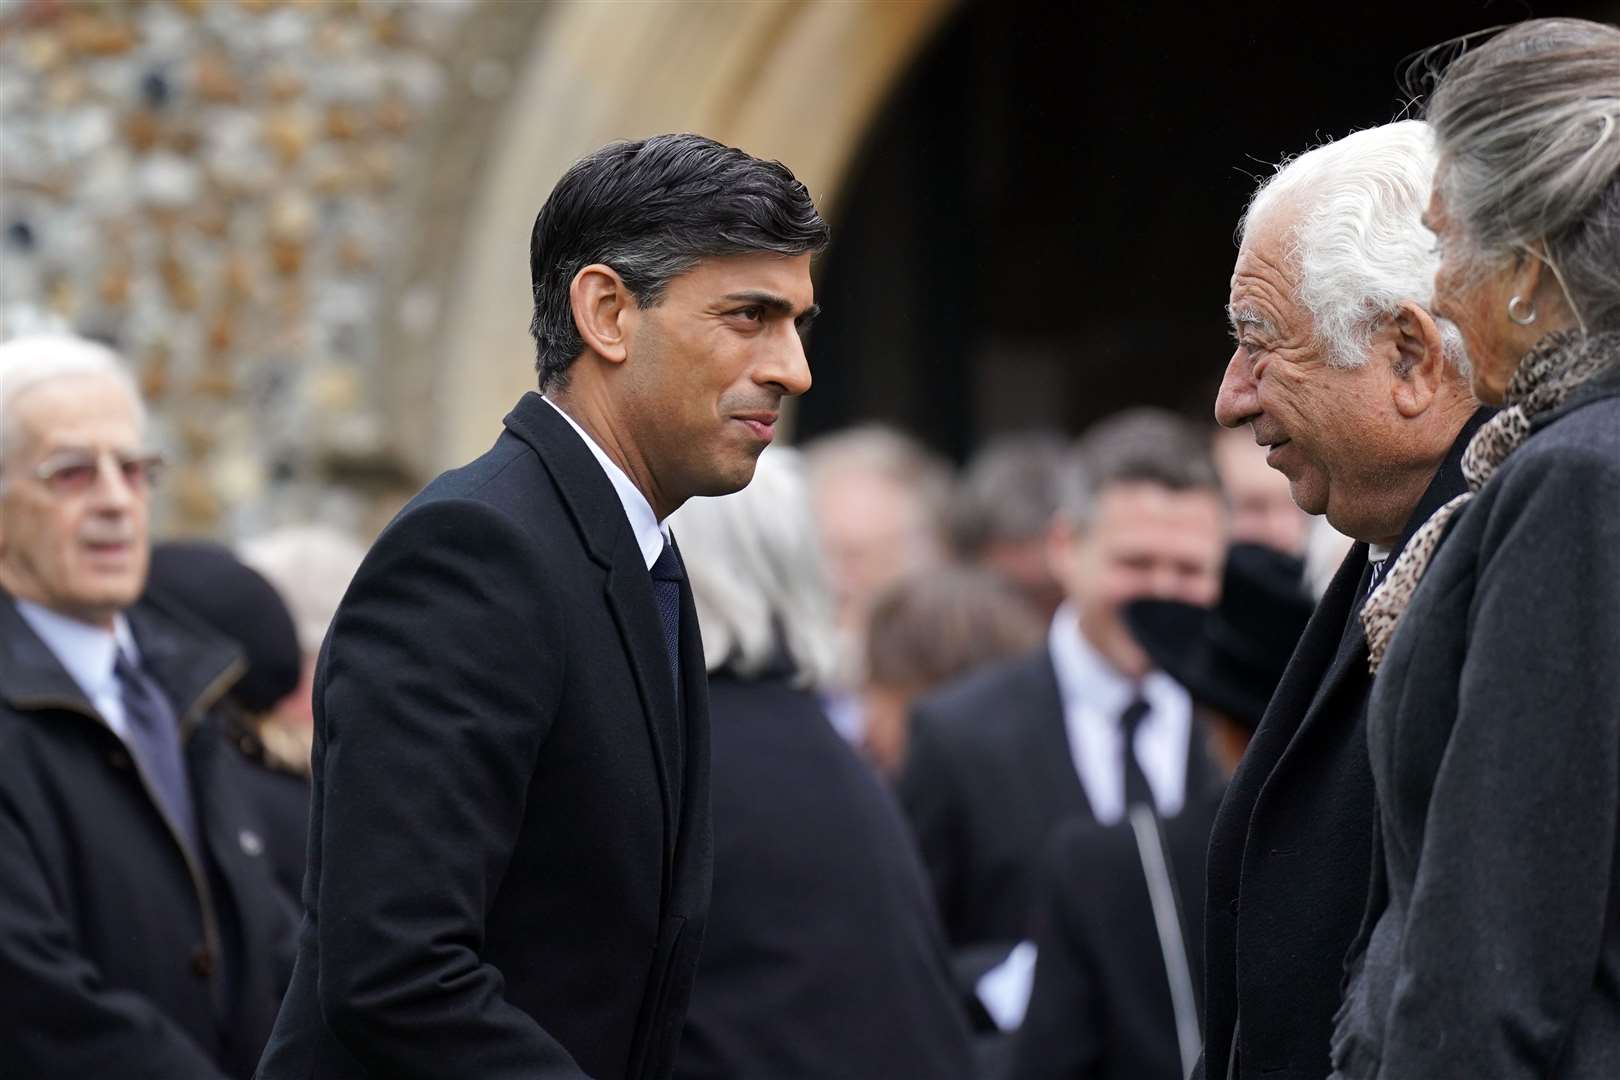 Prime Minister Rishi Sunak (centre) following Lady Boothroyd’s funeral at St George’s Church, Thriplow, Cambridgeshire (Joe Giddens/PA)